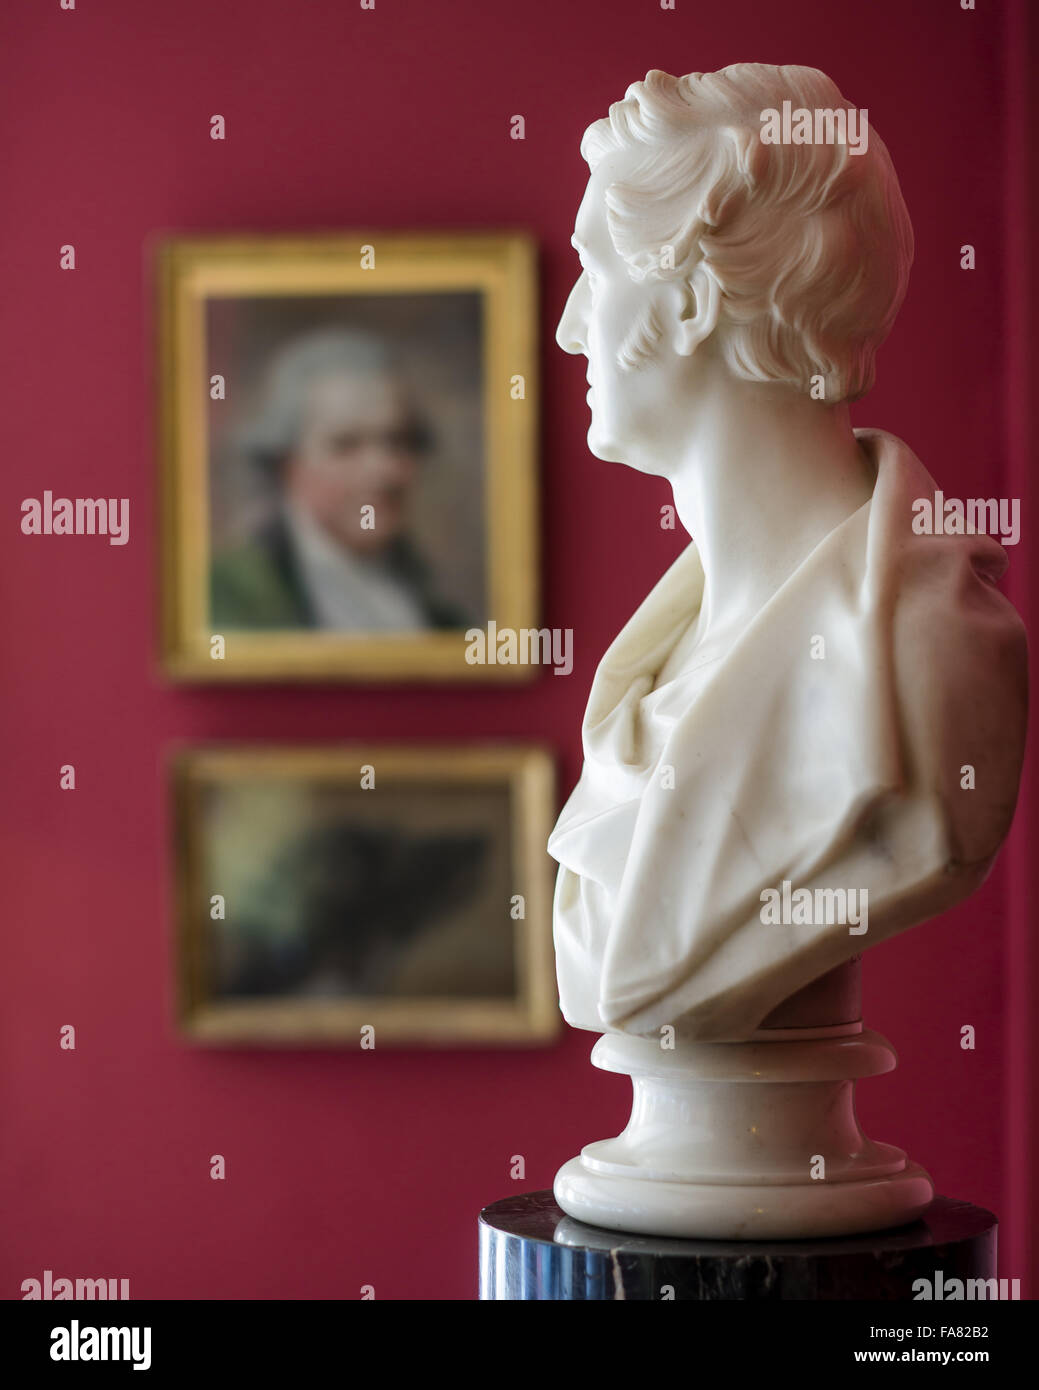 SIR THOMAS DYKE ACLAND, TENTH BARONET MP (1787-1871) by Edward Bowring Stephens at Killerton, Devon. Marble bust shown here in profile. National Trust Inventory Number 922459. Stock Photo